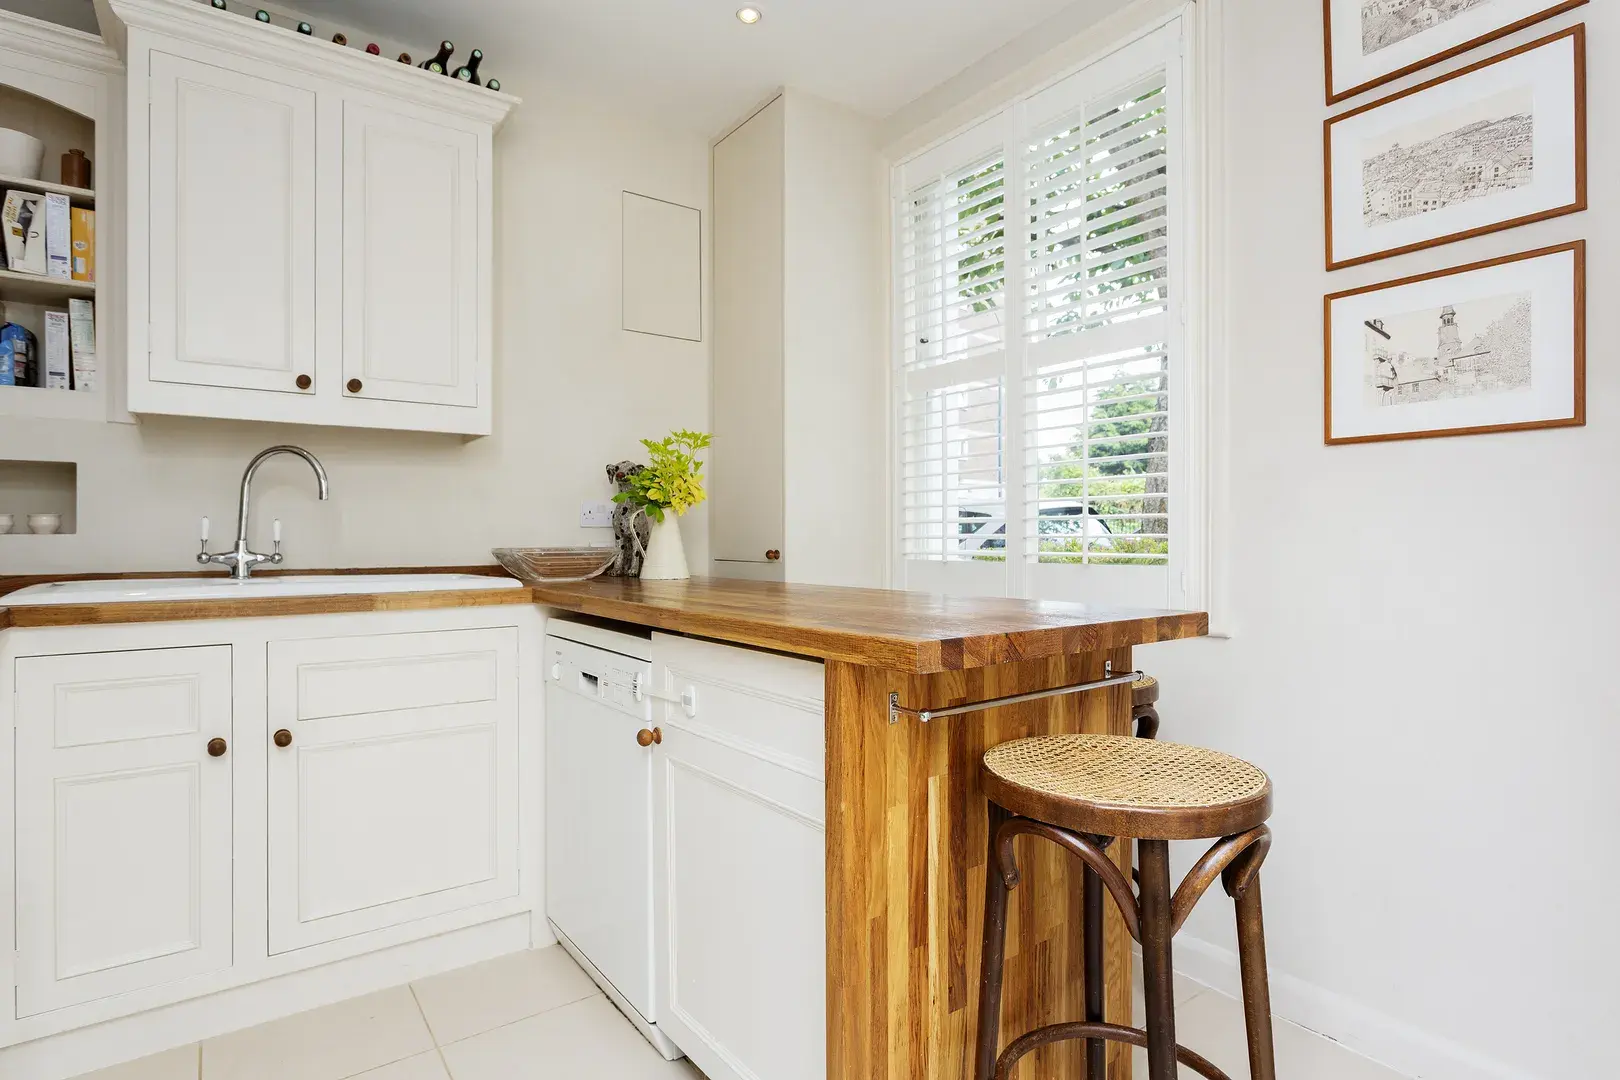 Sandilands Road, holiday home in Fulham, London